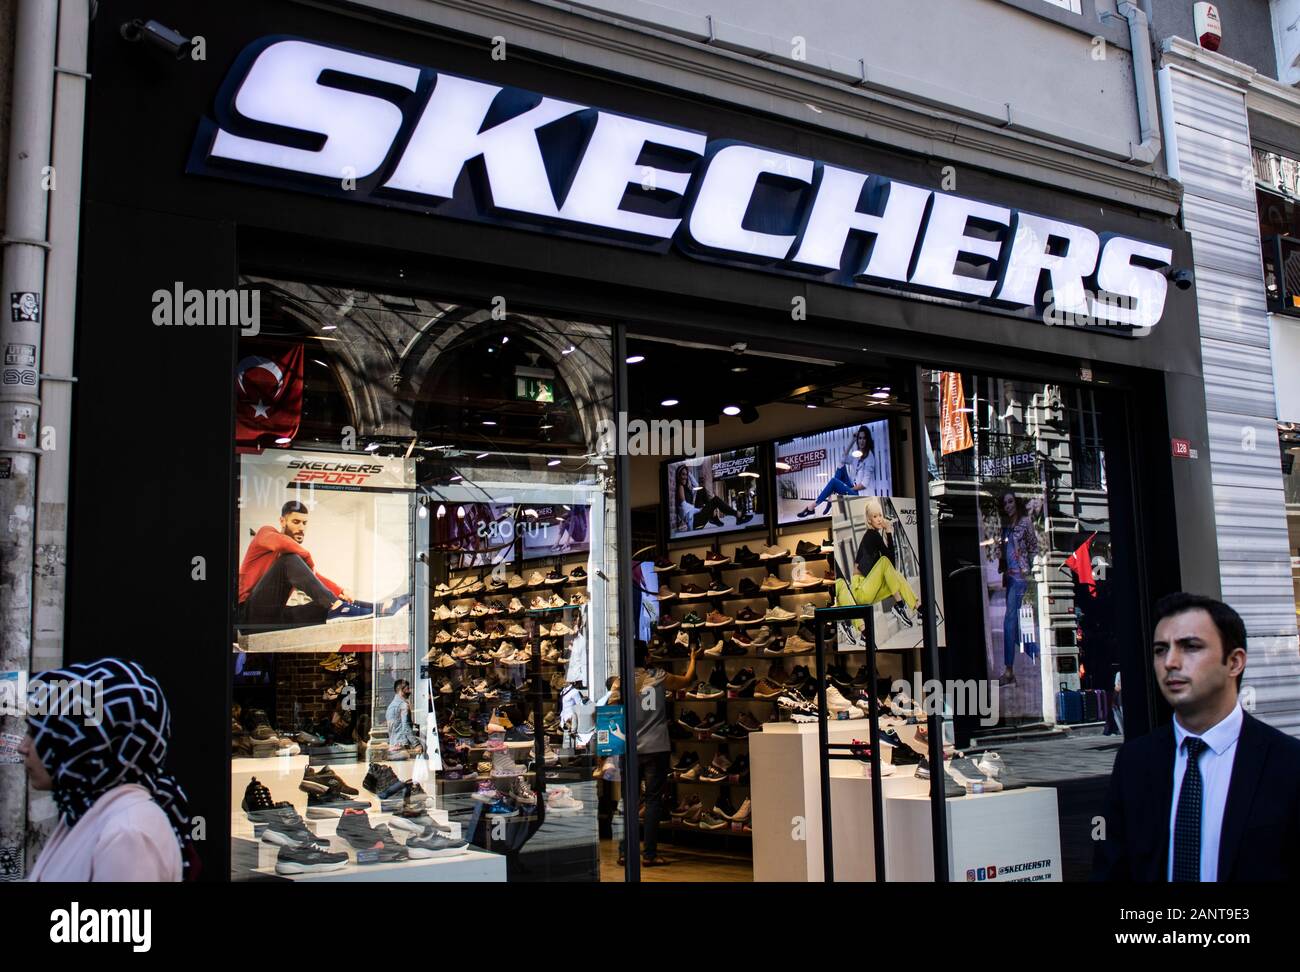 skechers shoes stores toronto